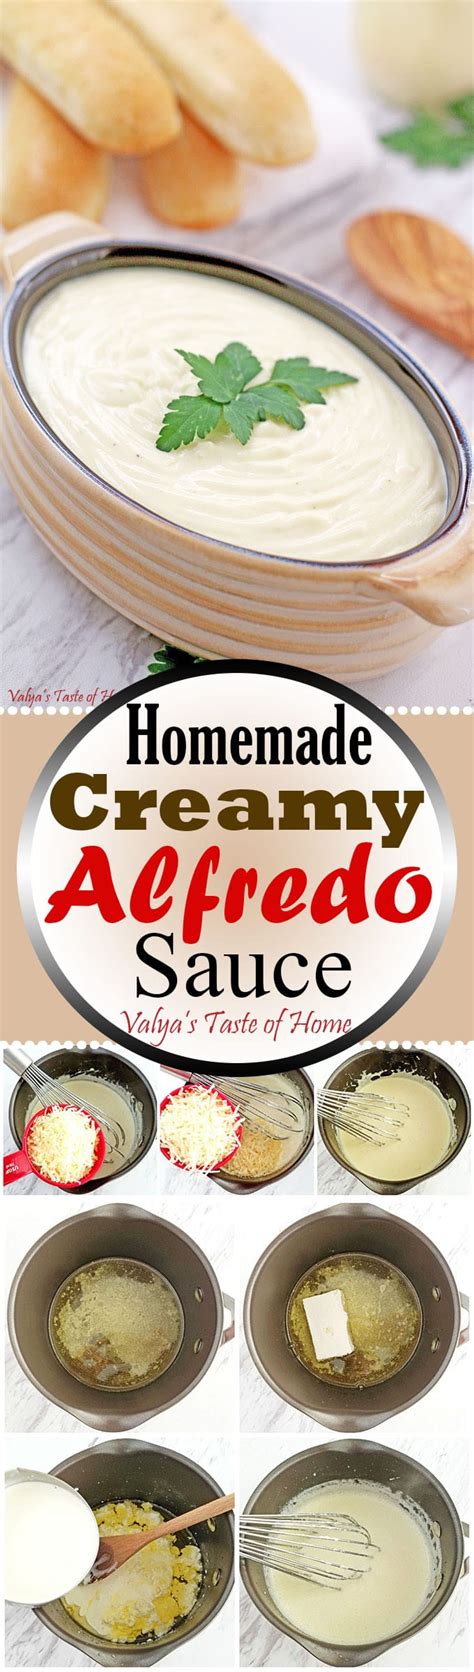 Homemade alfredo sauce is the simplest, most delicious pasta sauce recipe you'll ever make. Homemade Creamy Alfredo Sauce Recipe - Valya's Taste of Home